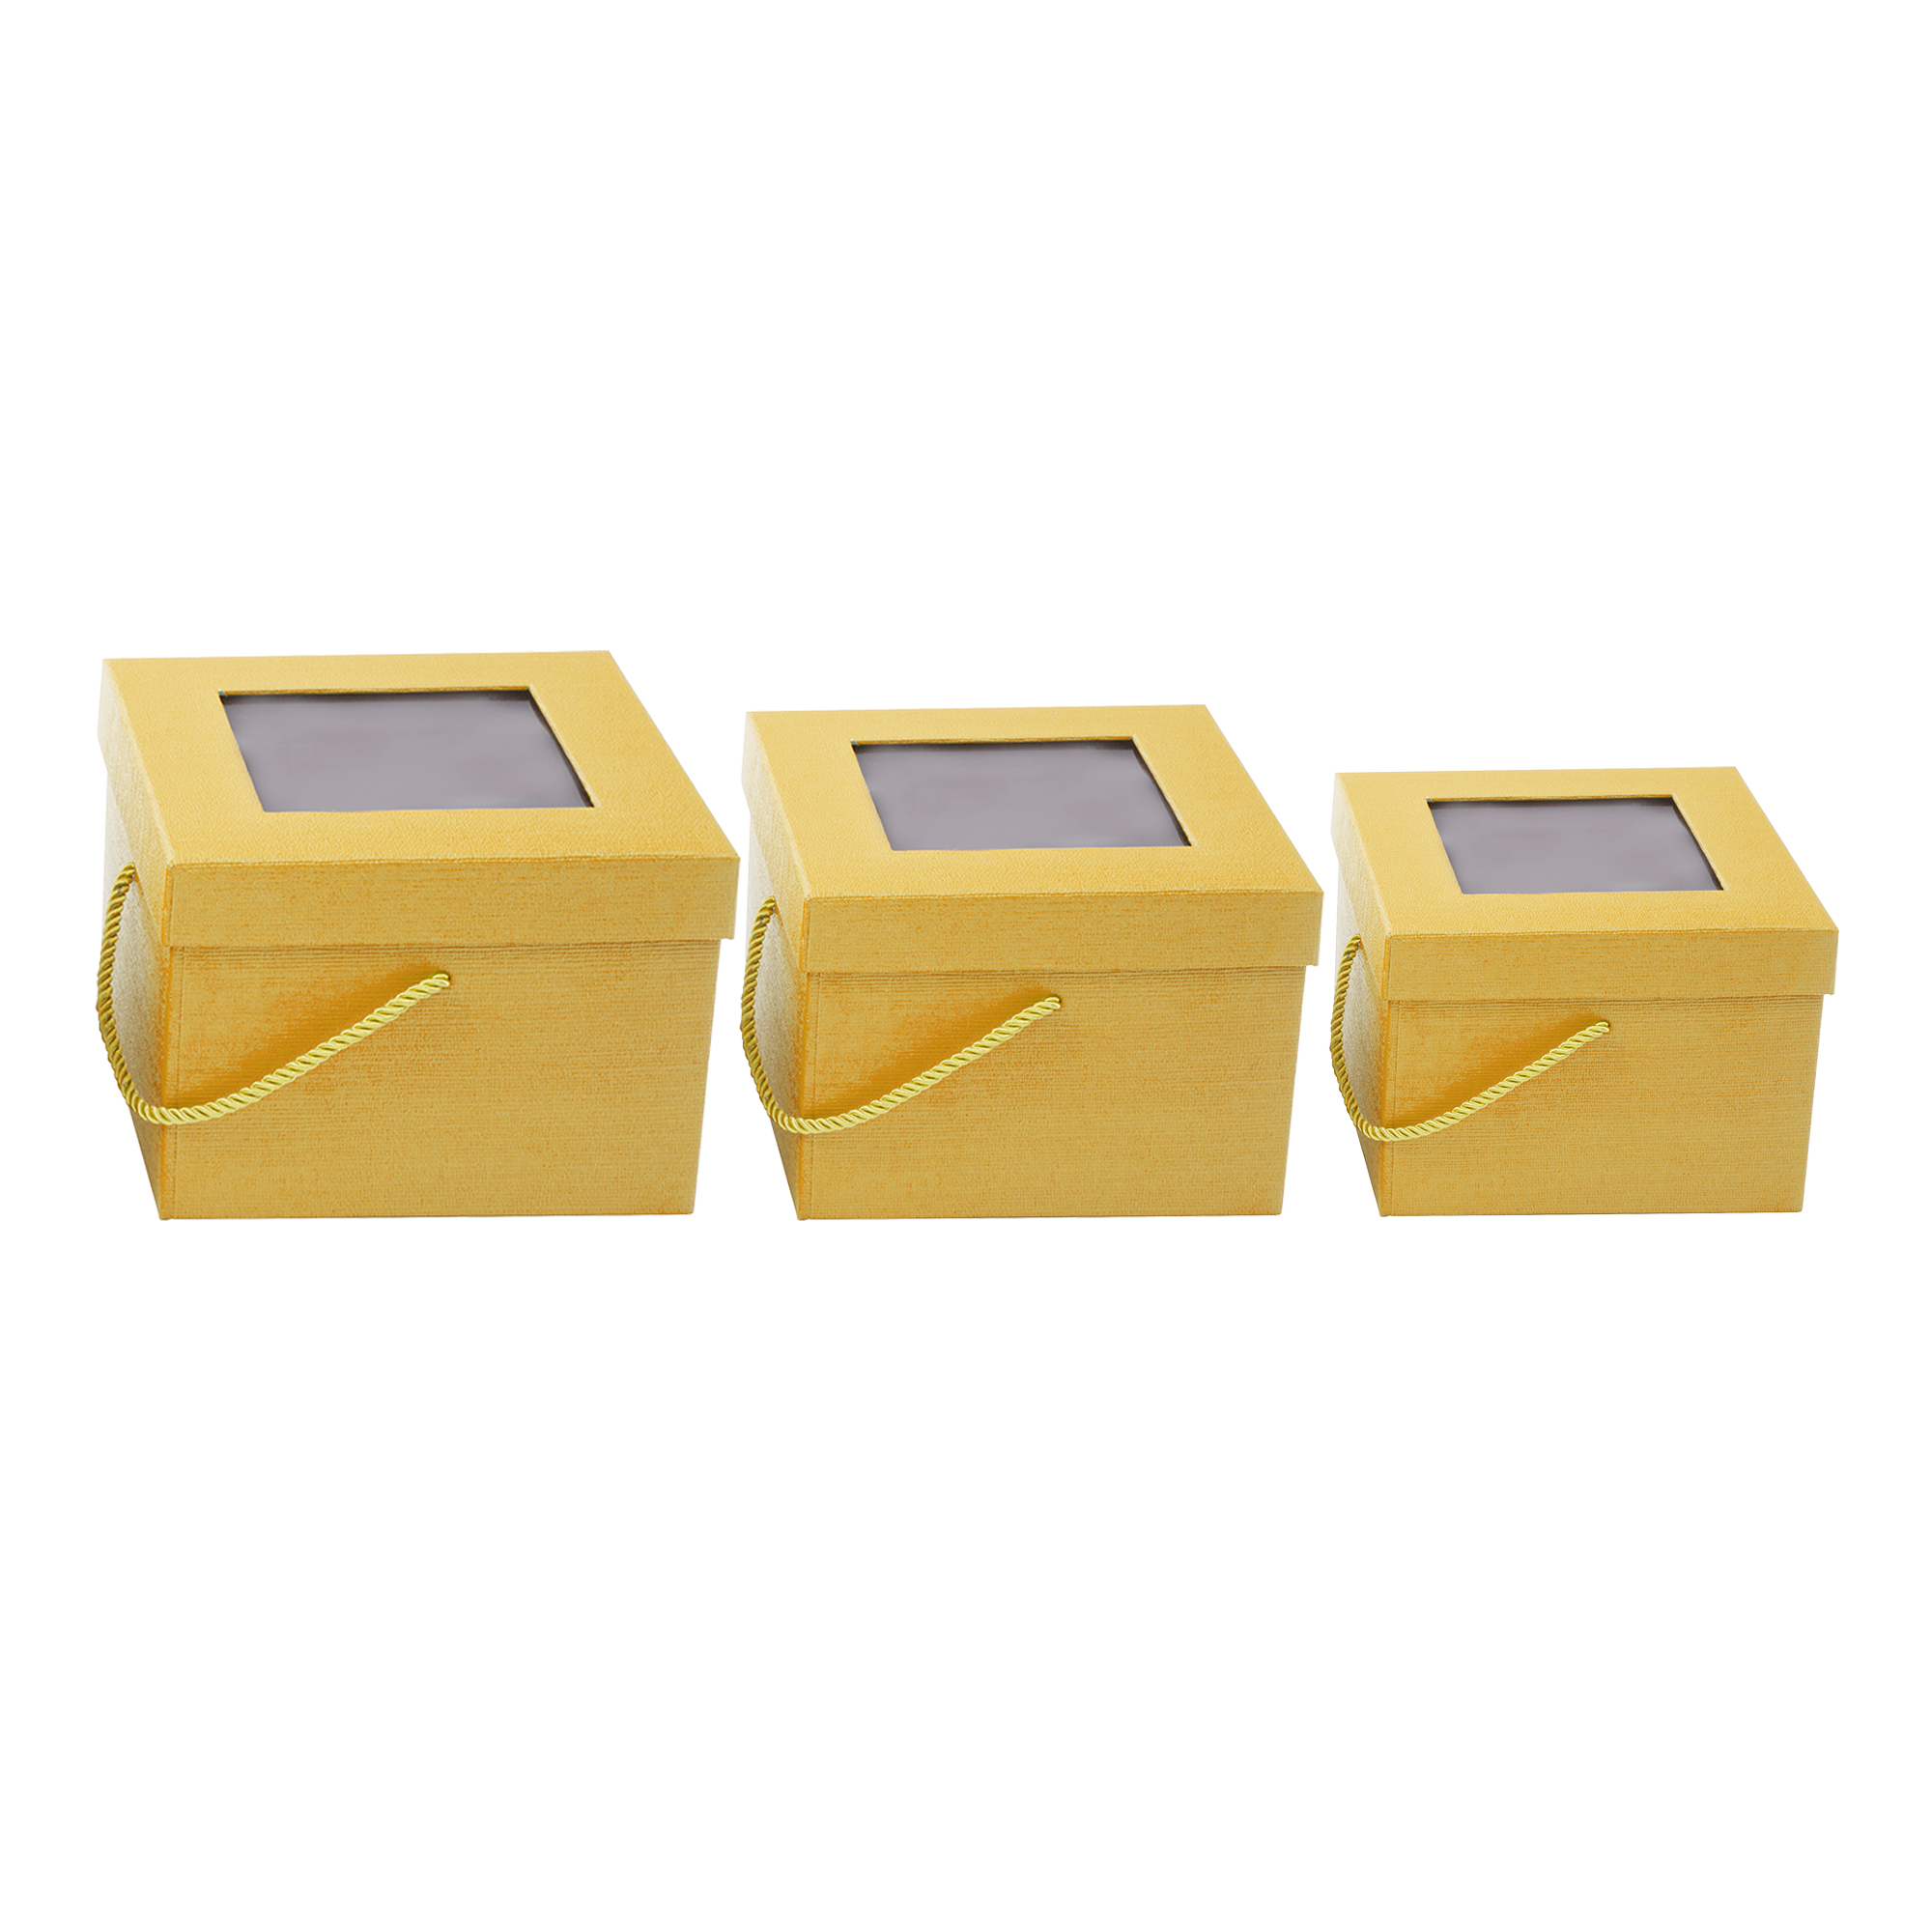 Nested Square Floral Boxes 3pc/set - All Gold